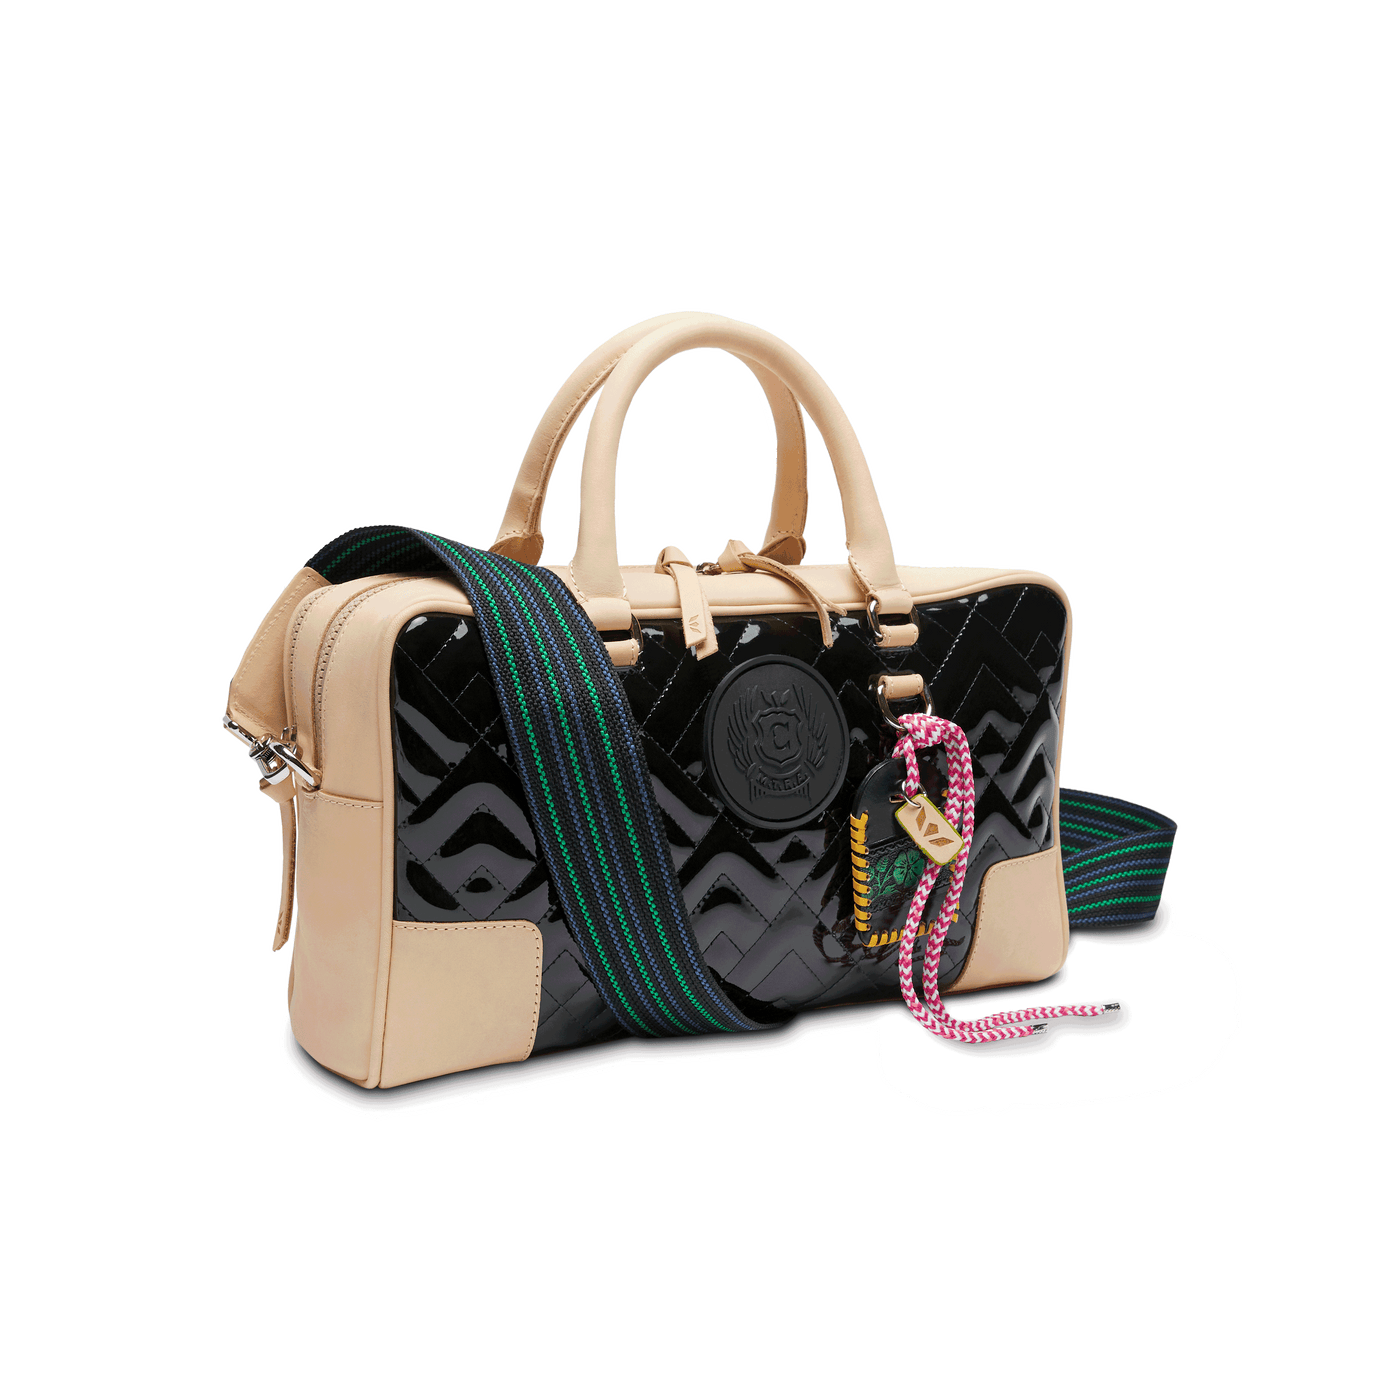 Consuela Inked Satchel – Southern Soule Designs